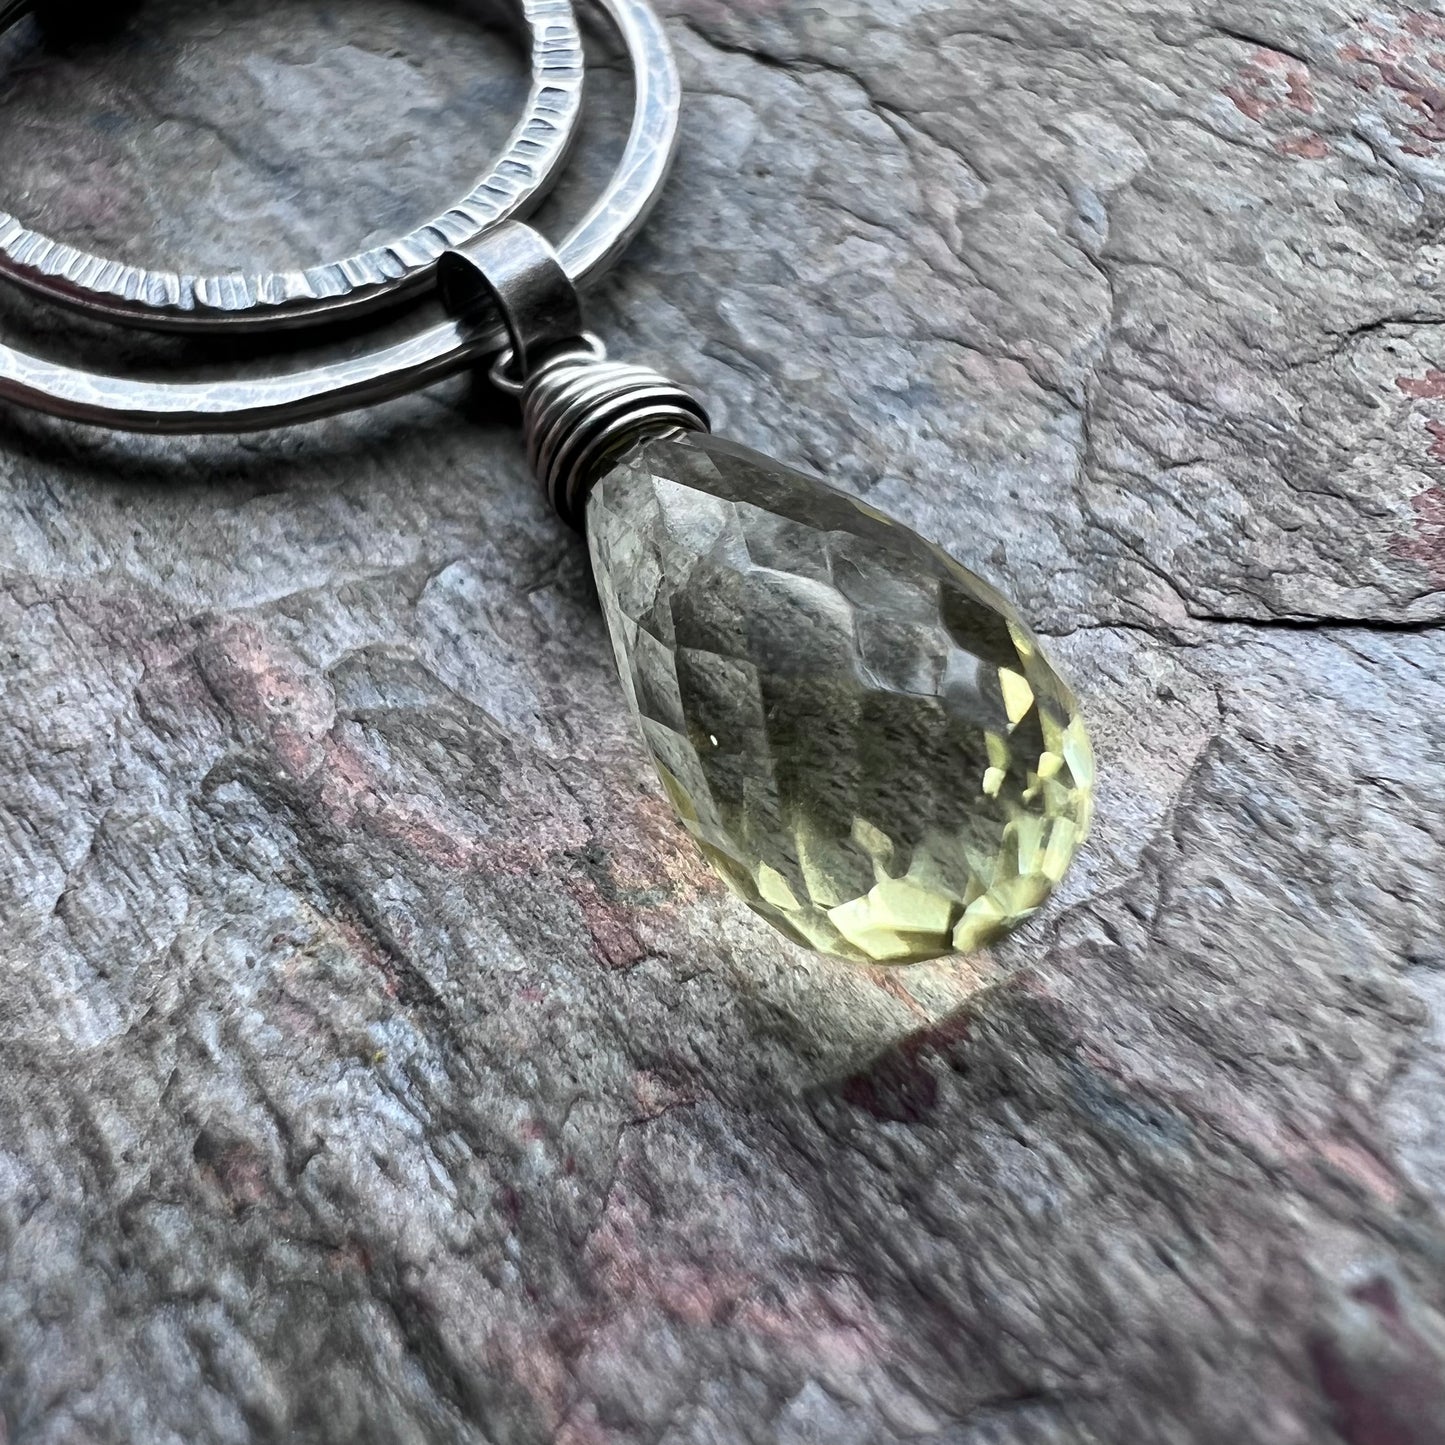 Sterling Silver Lemon Topaz Necklace - Genuine Lemon Topaz and Hammered Rings Pendant on Sterling Silver Chain - Handmade Jewelry